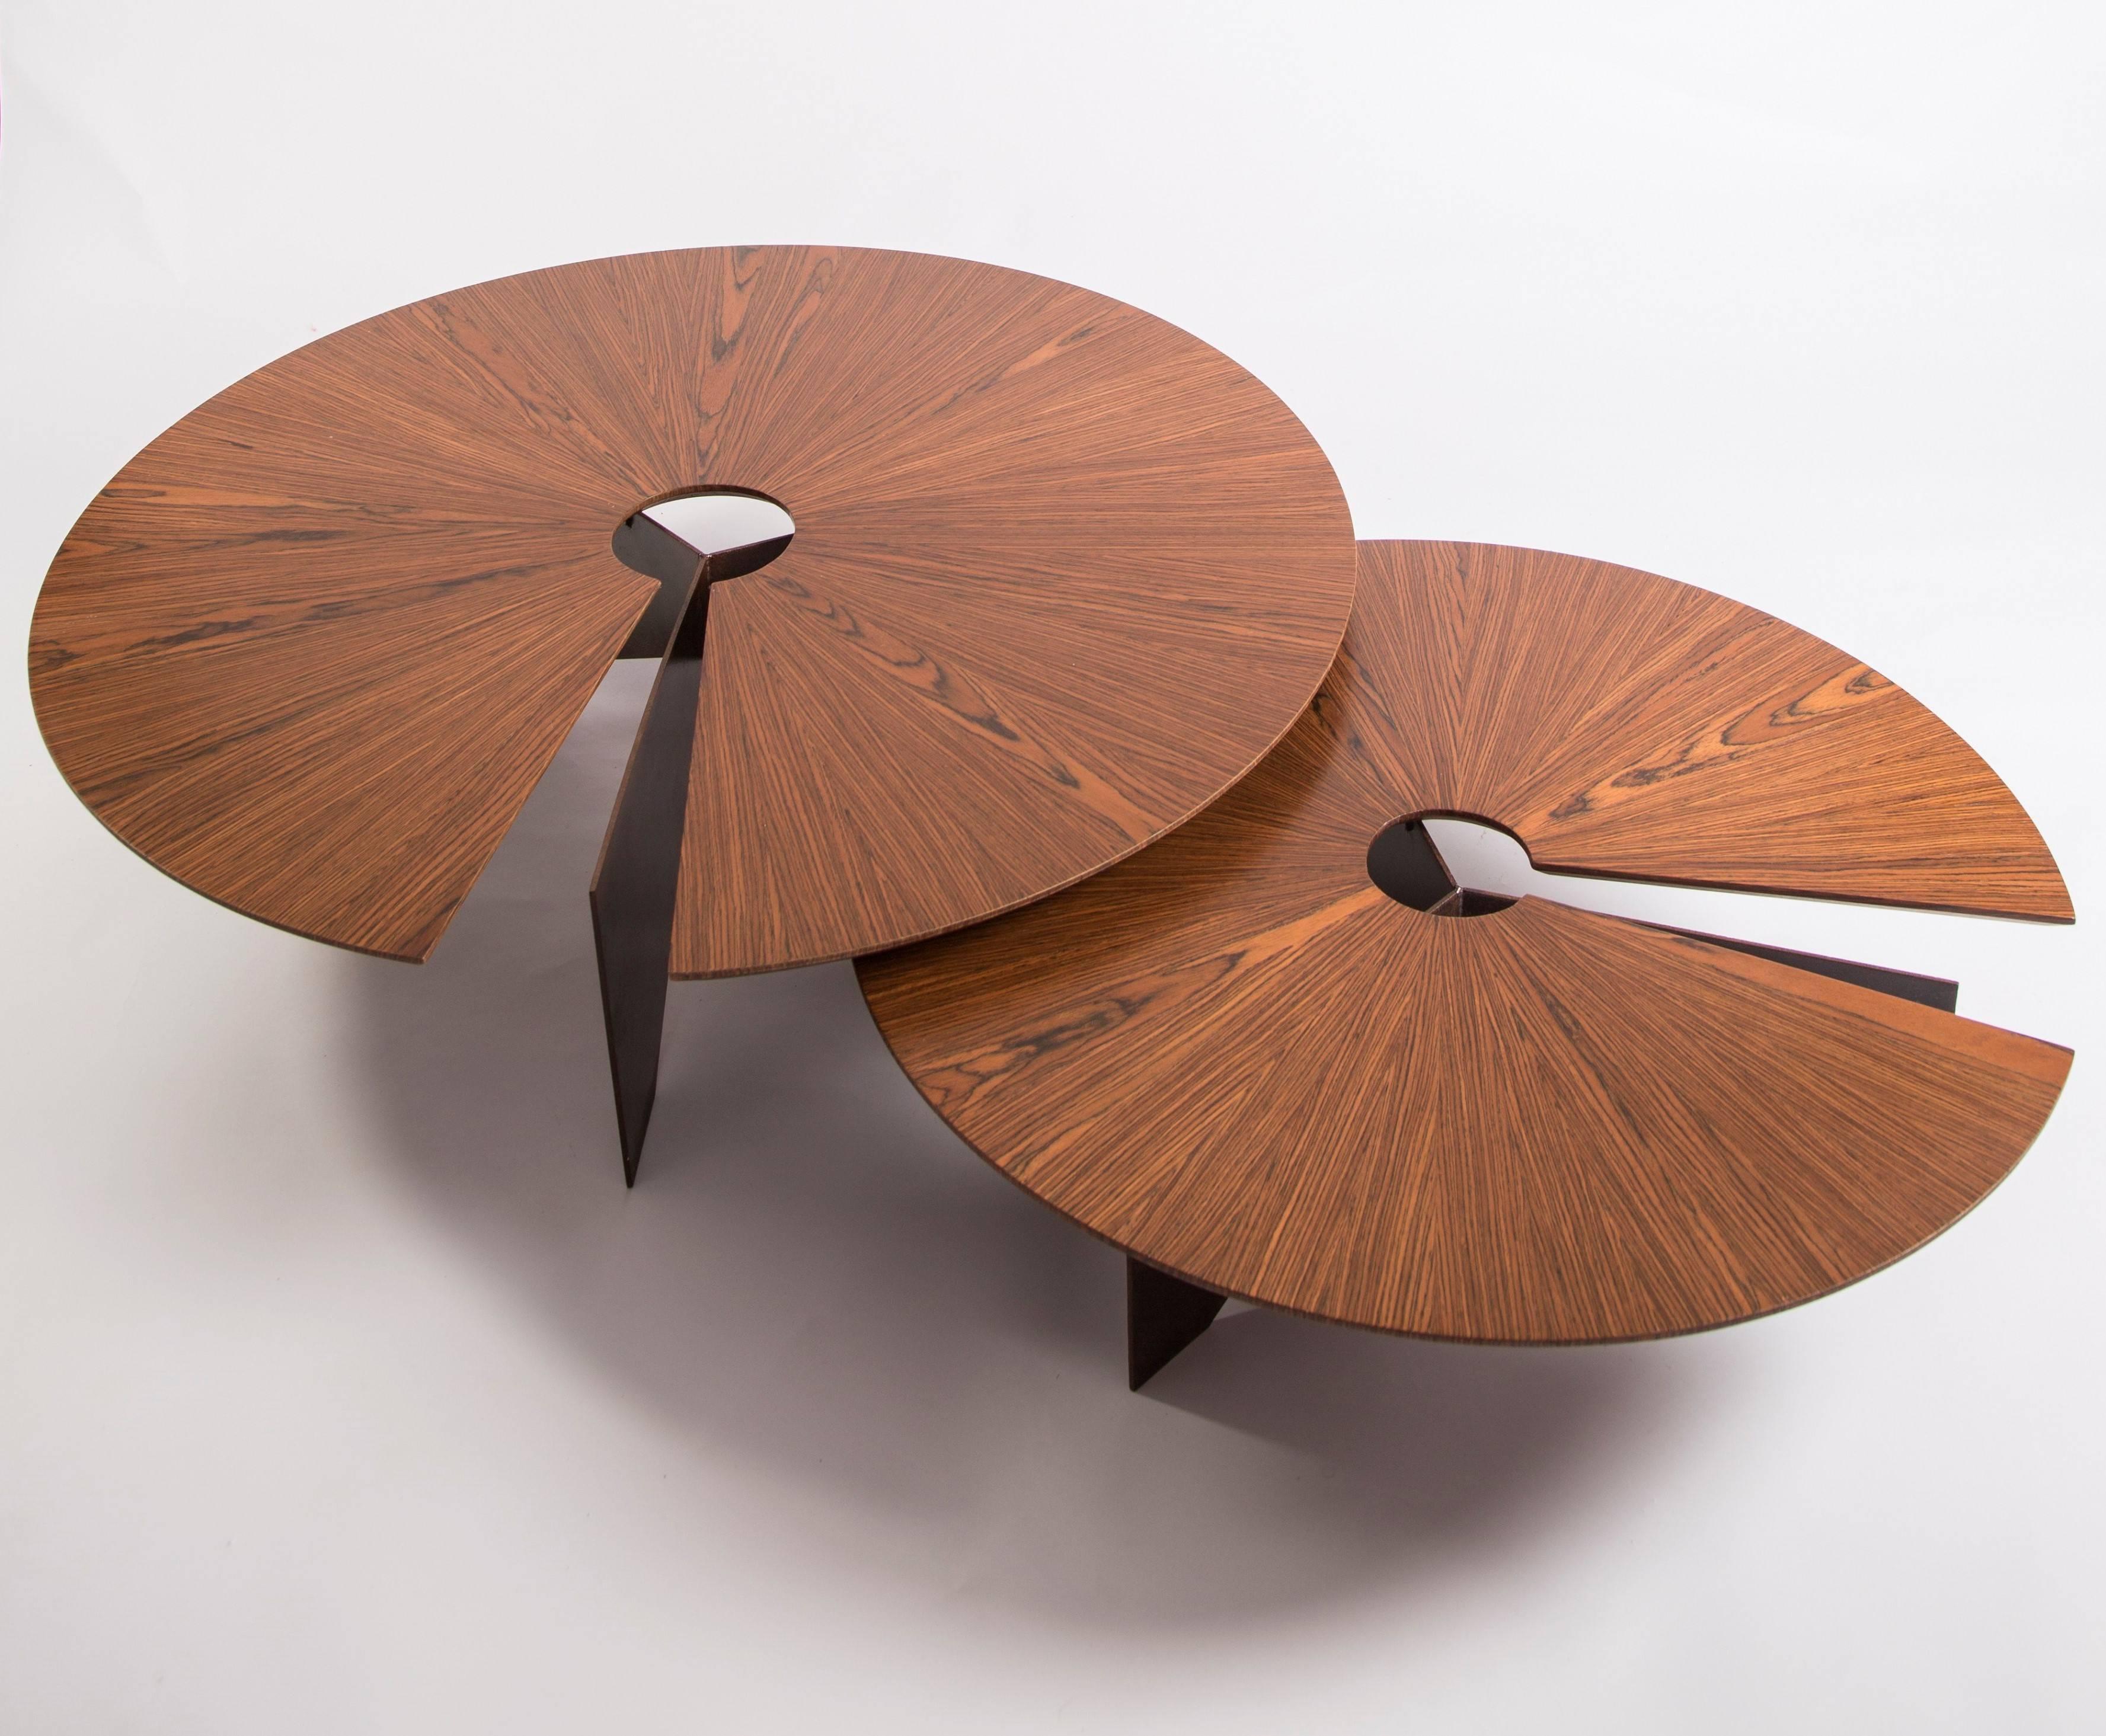 The first work piece developed by the designer, this Minimalist and modern coffee table receives the name Lena in honor of the nickname of his mother, Helena. It disrupts the observer, as it has its top balanced between only two of its three feet,